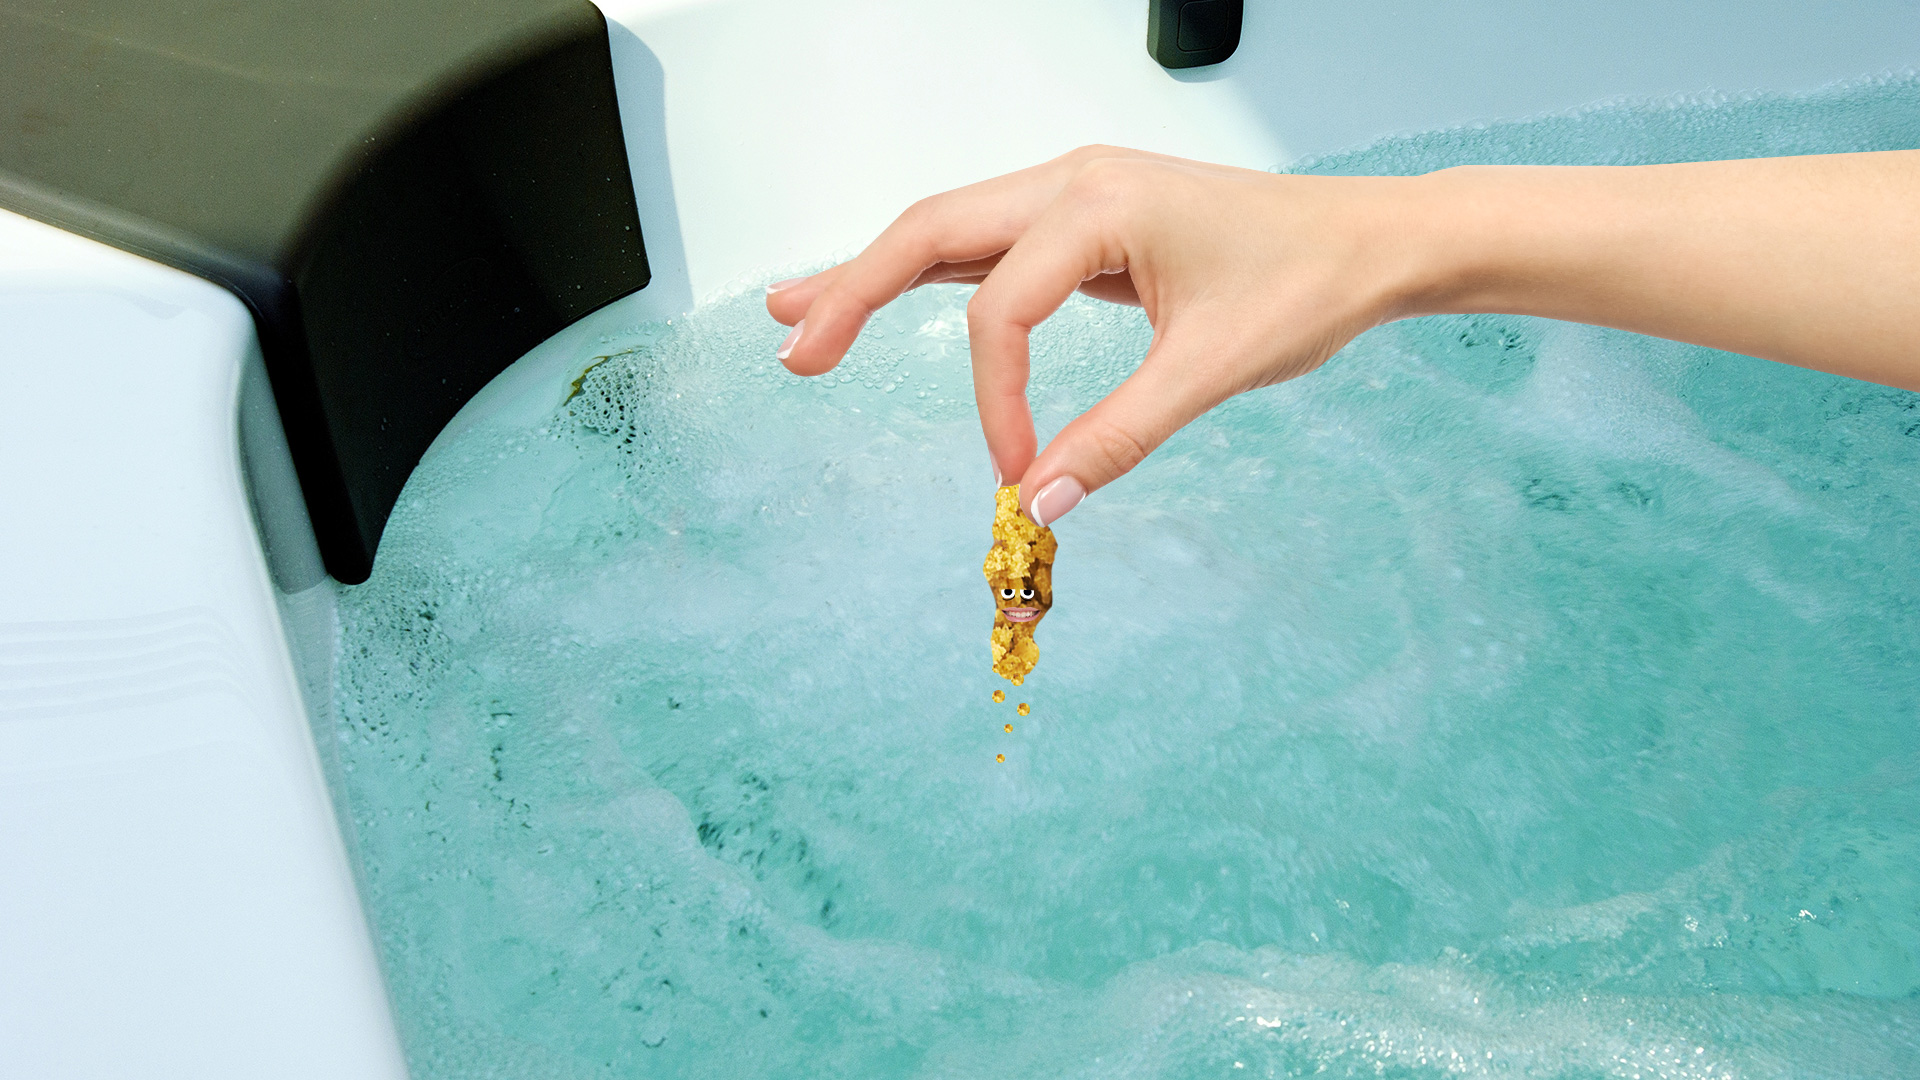 A hand crumbling a stock cube into a hot tub